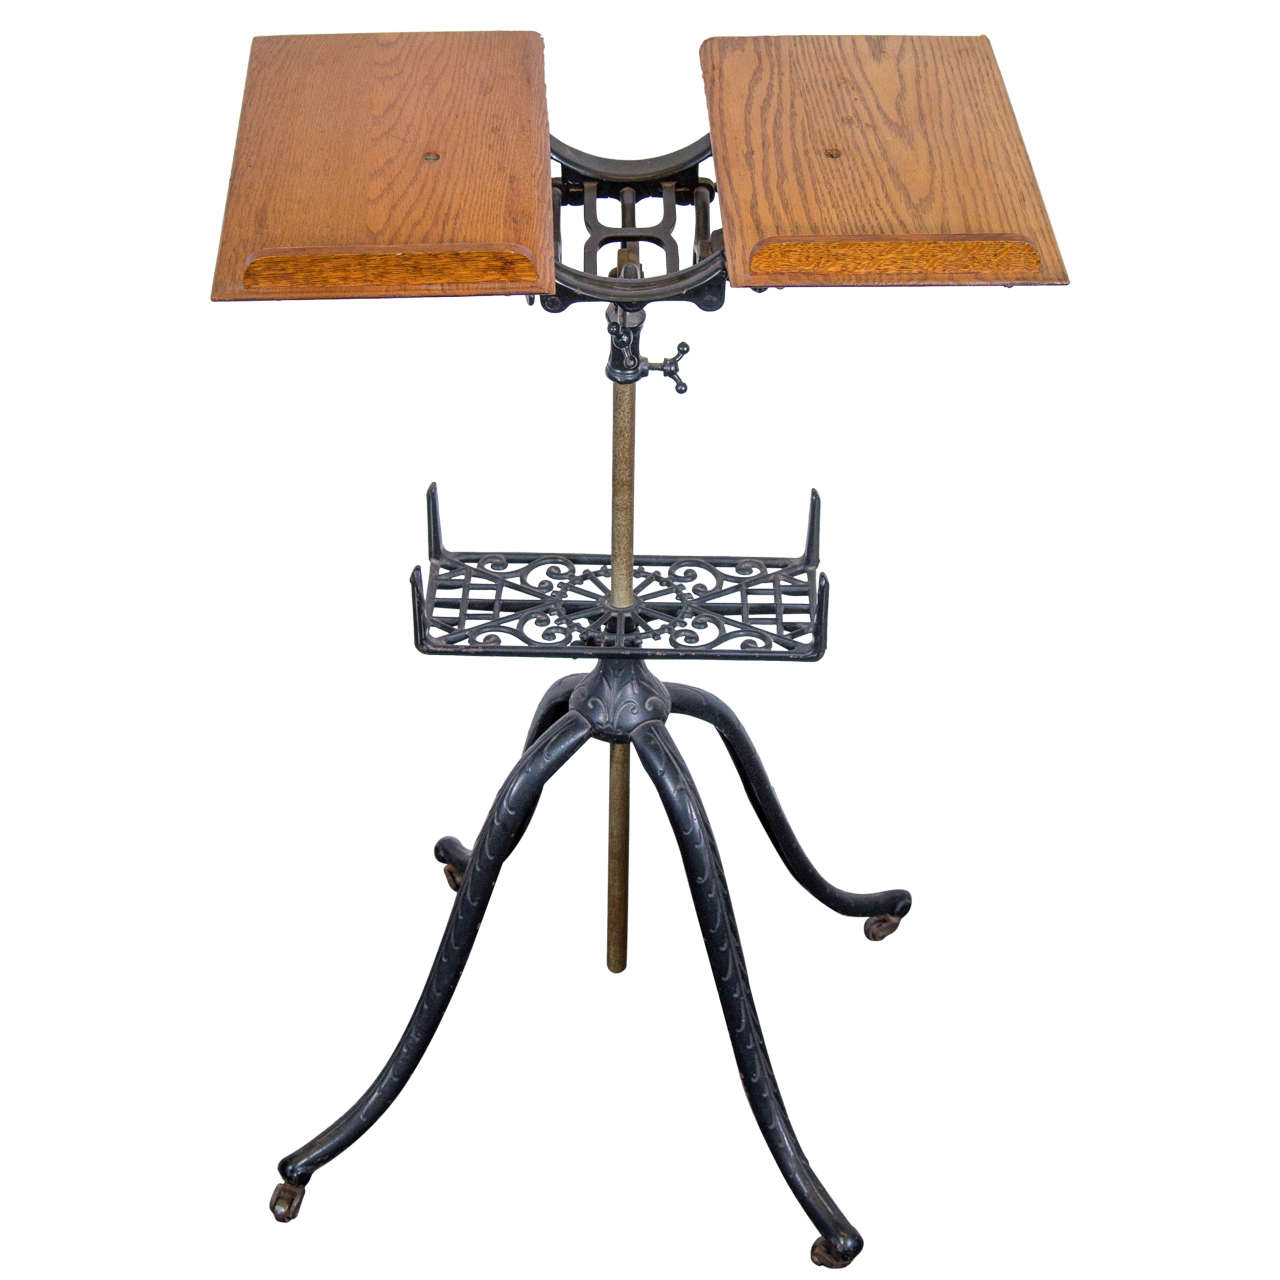 Antique Oak and Iron Dictionary Stand with Adjustable Height